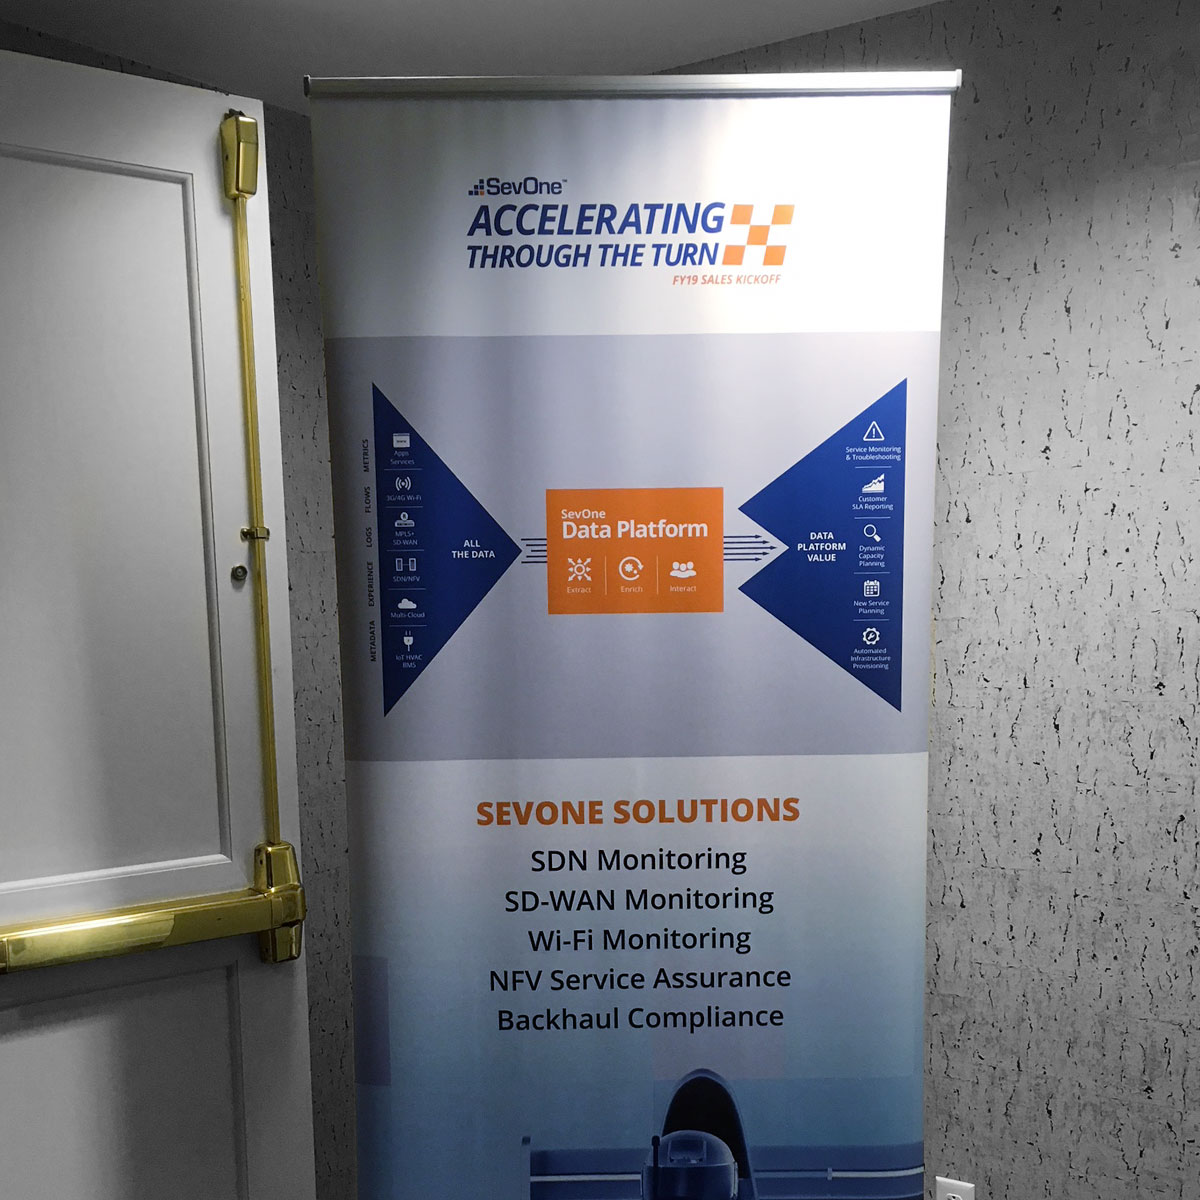 SevOne FY19 Sales Kickoff – Solutions Pullup Banner at the Event